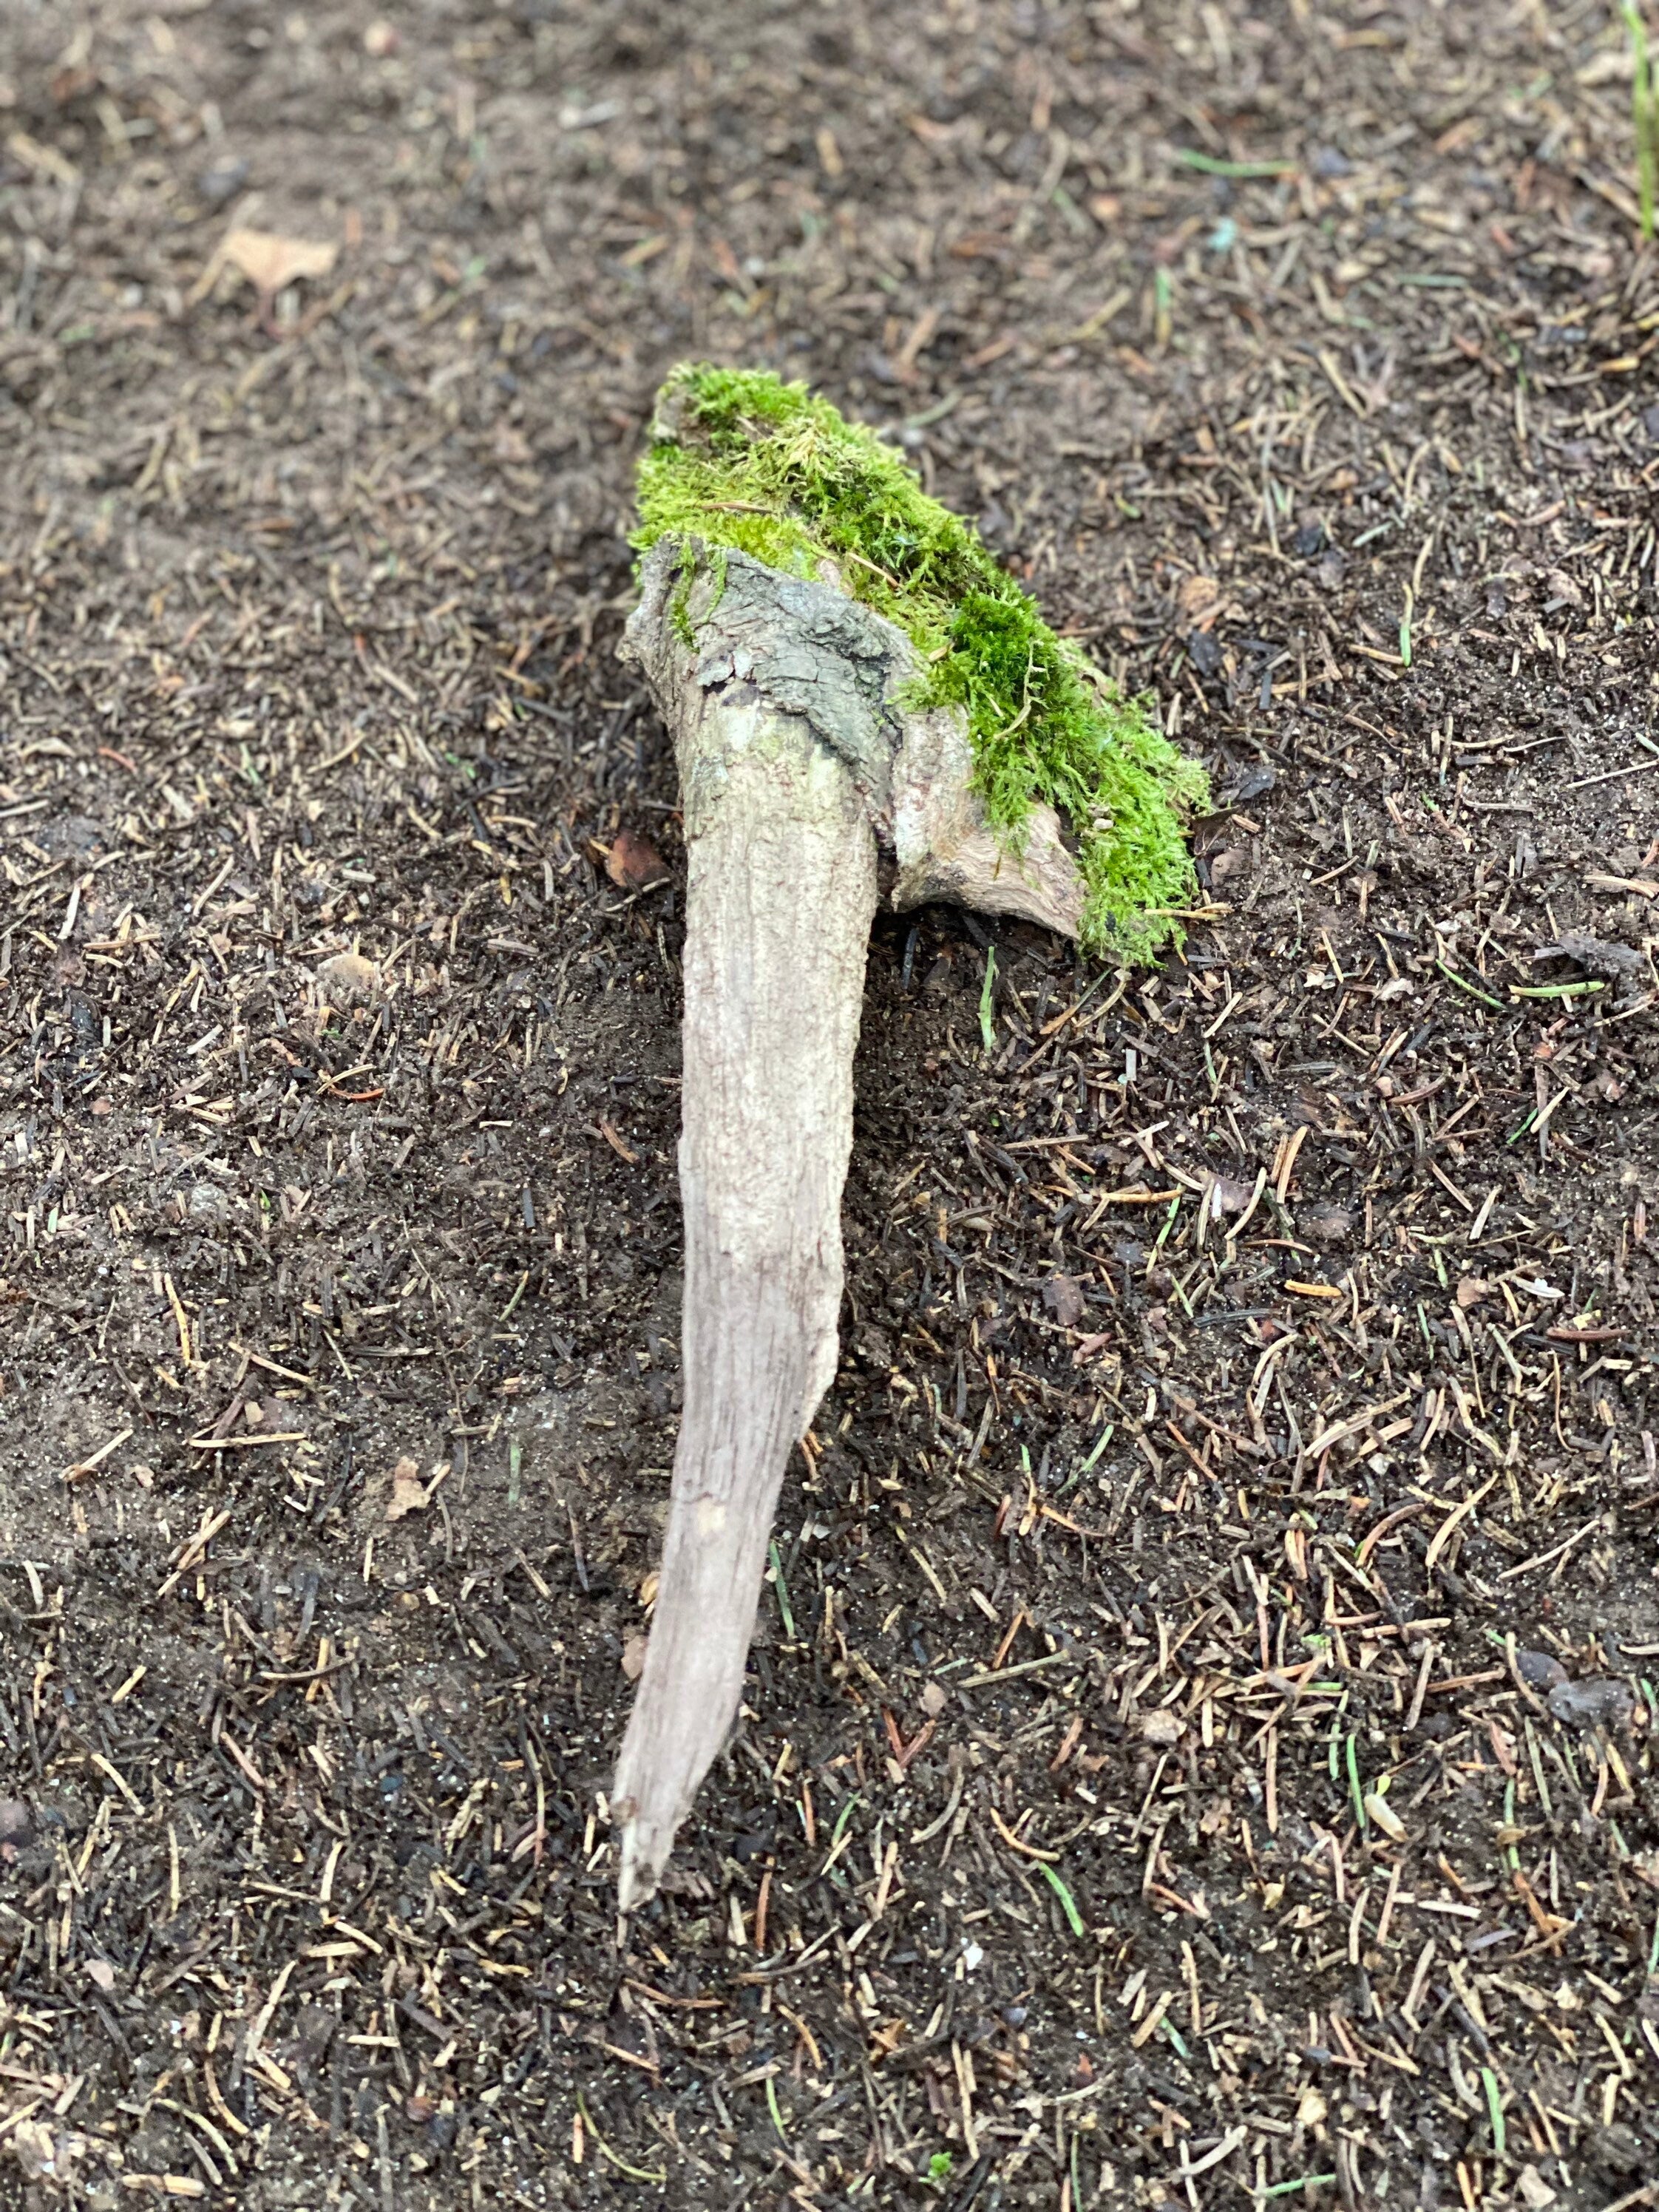 Moss Covered Log, Mossy Log, 12 Inches Long by 4 Inches Wide and 2 Inches High